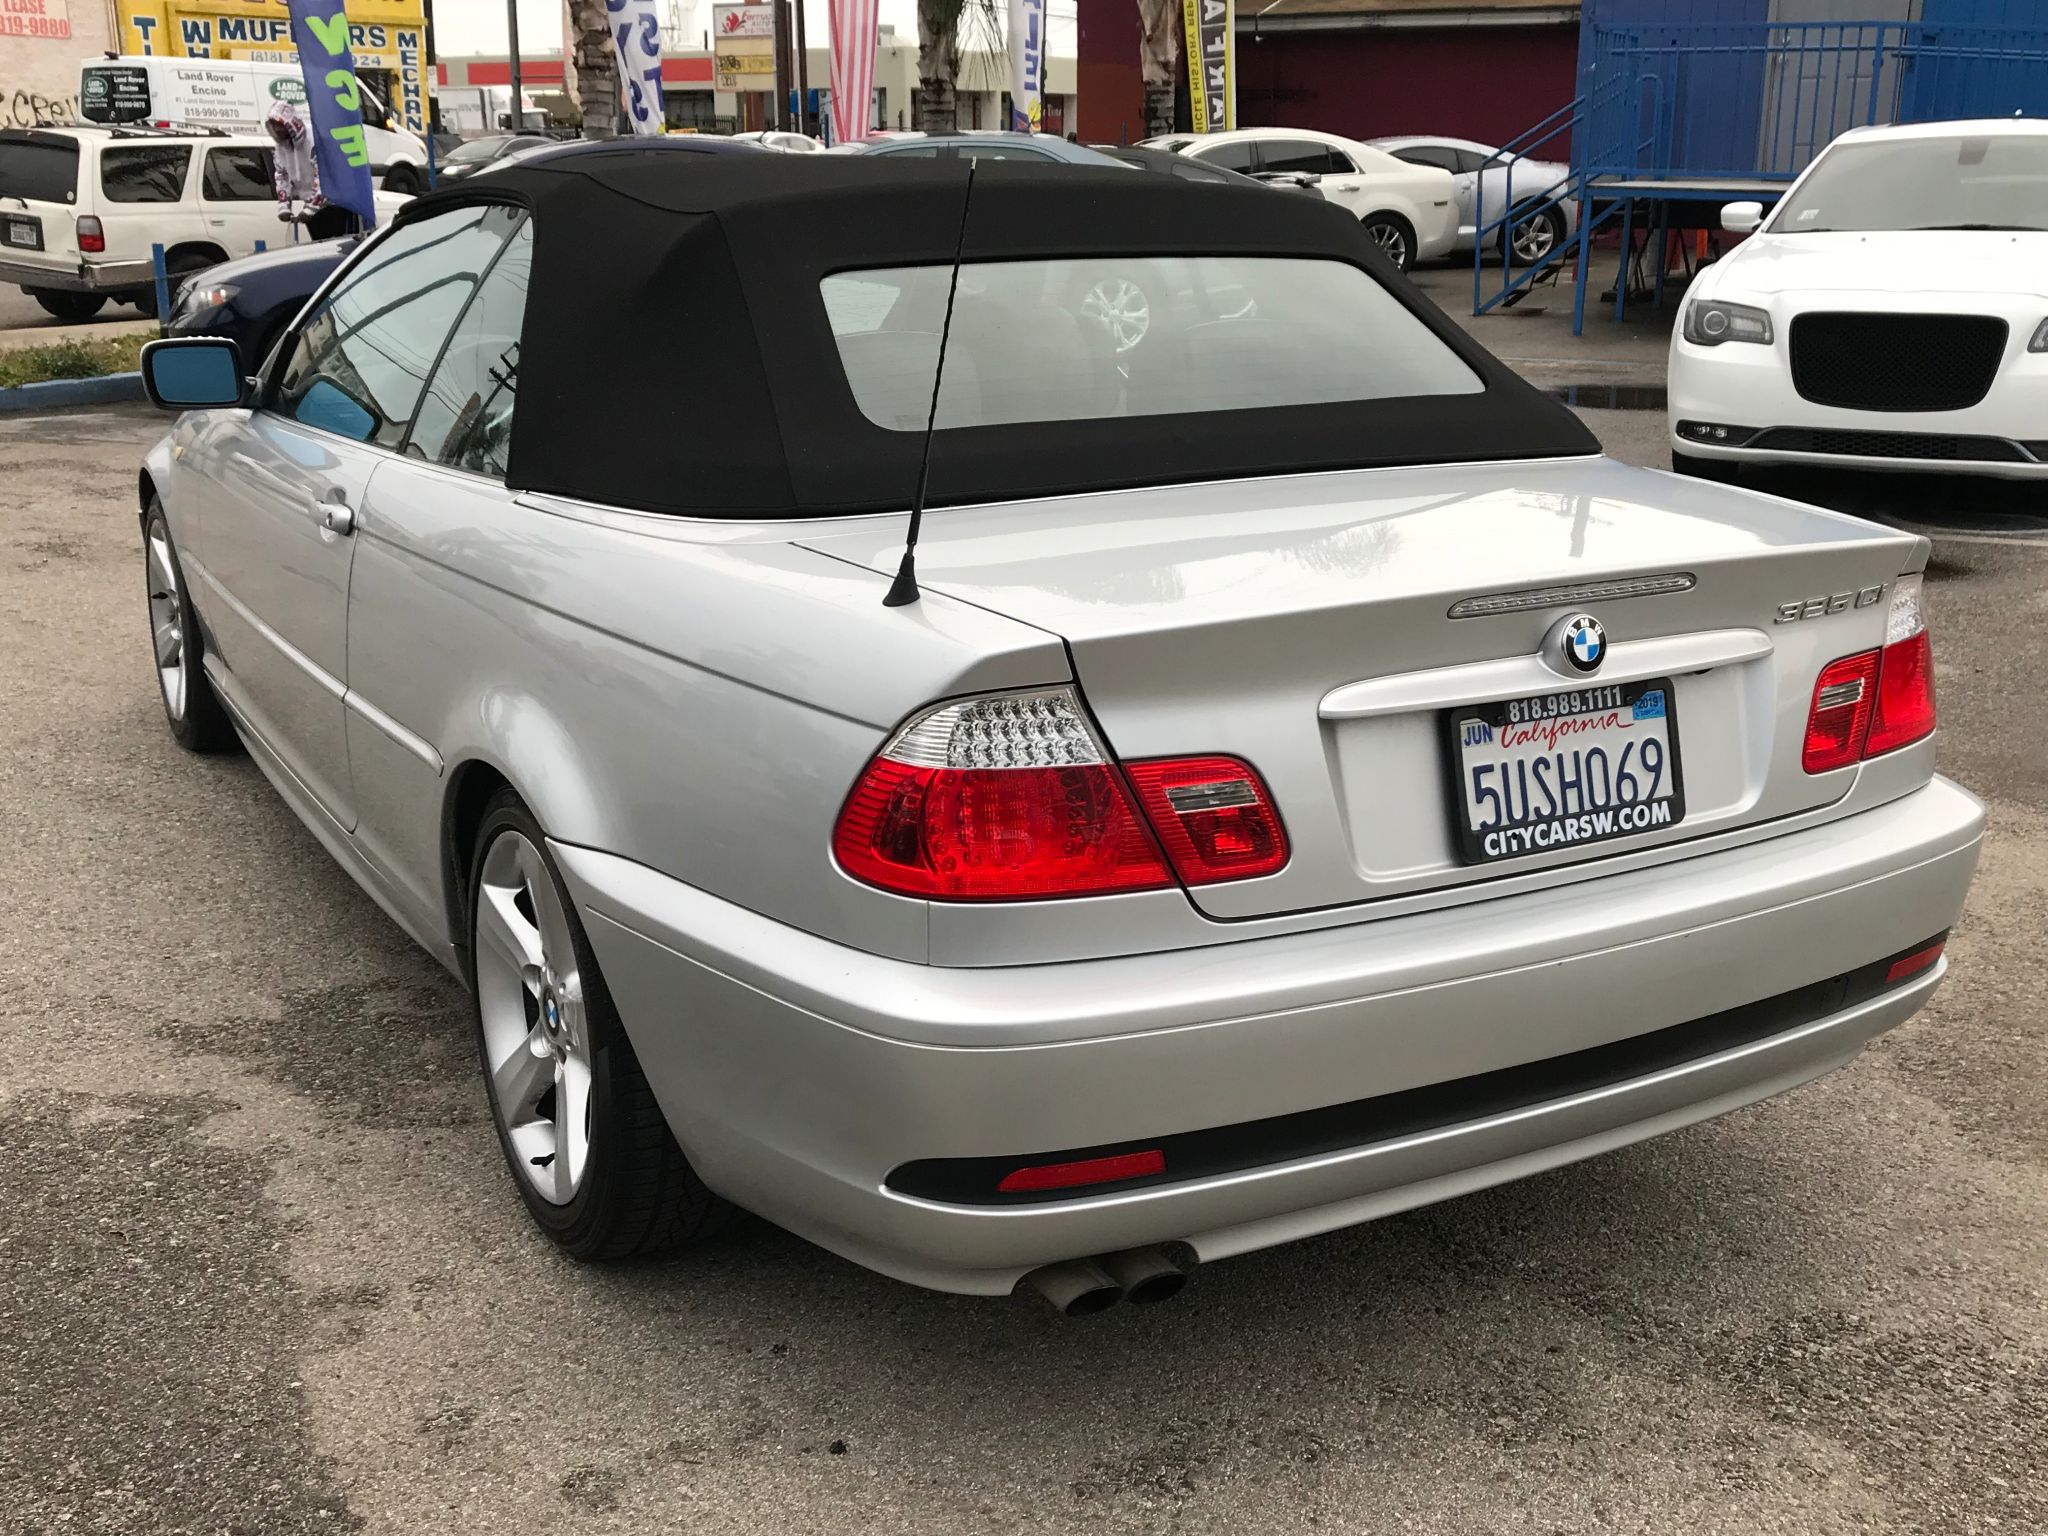 Used 2006 BMW 3 Series 325Ci Convertible at City Cars